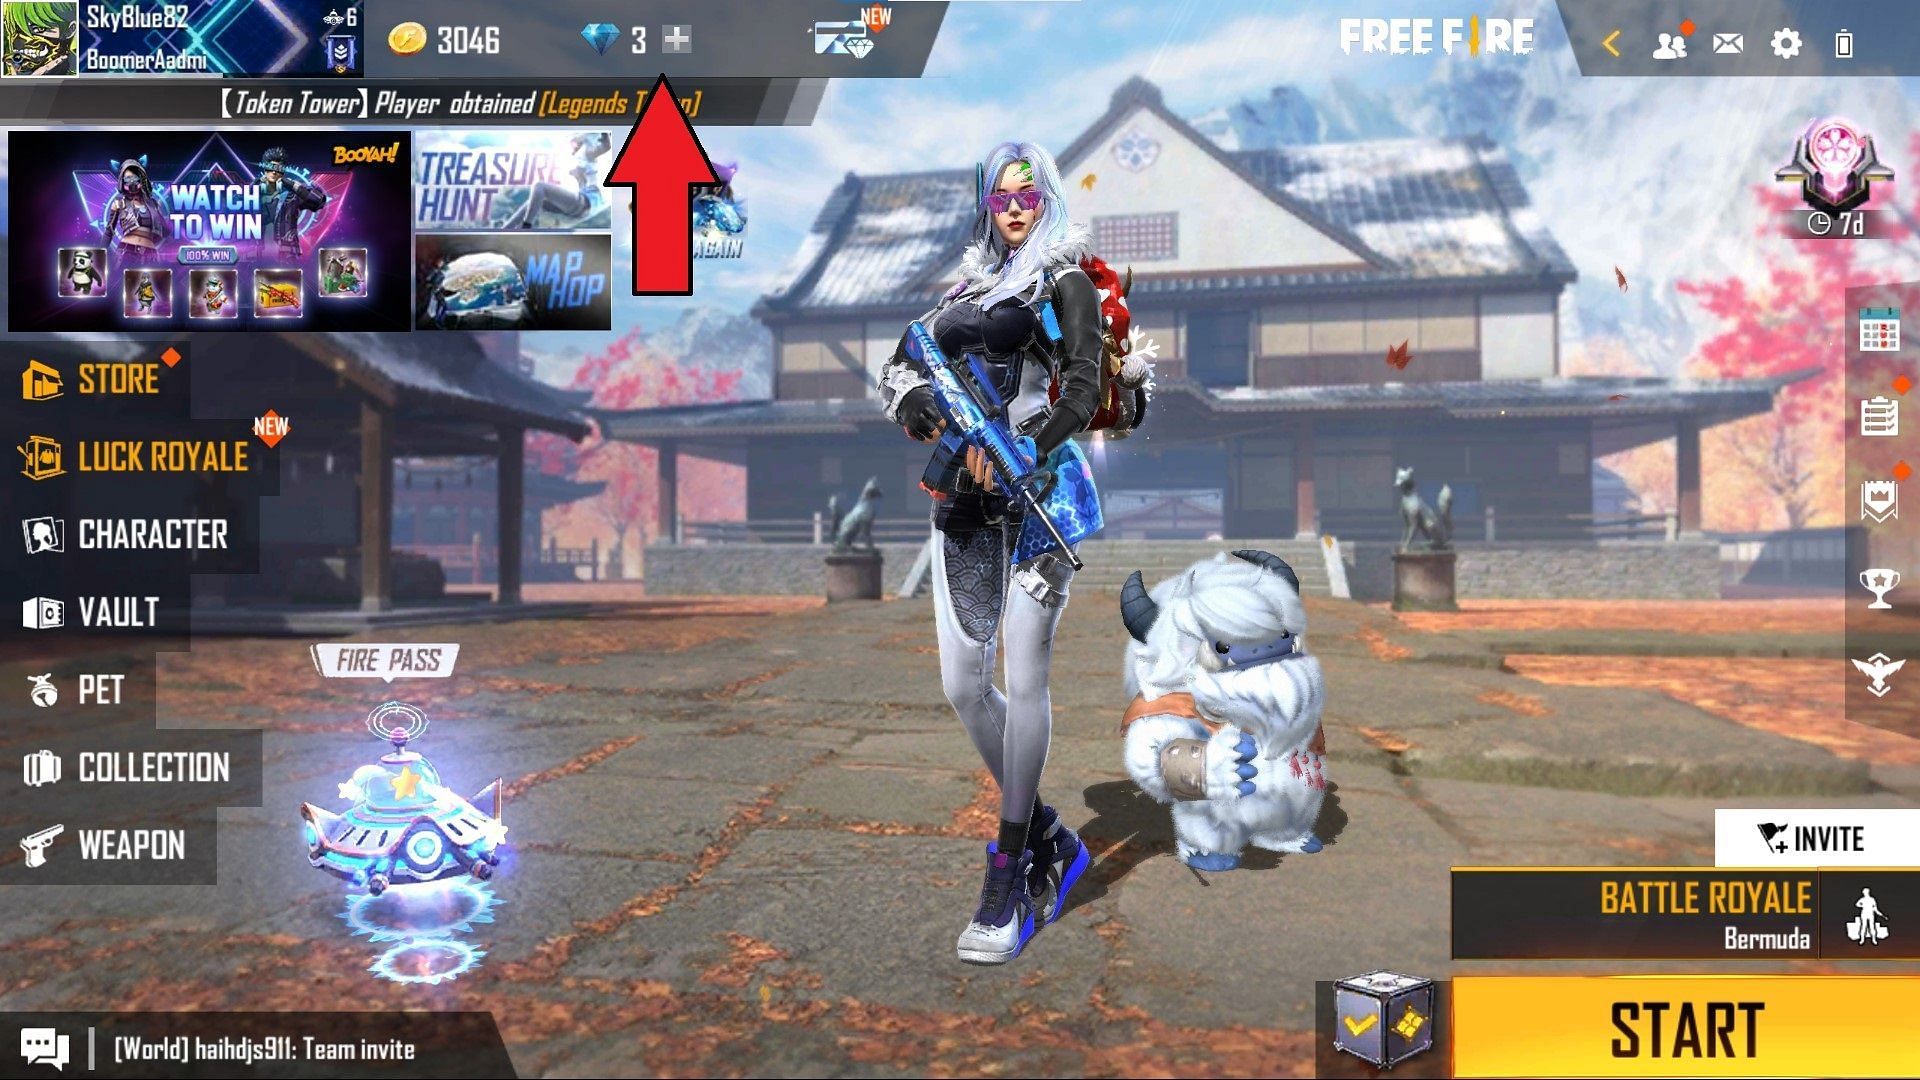 Players must tap on the diamonds icon at the top of the screen (Image via Free Fire)